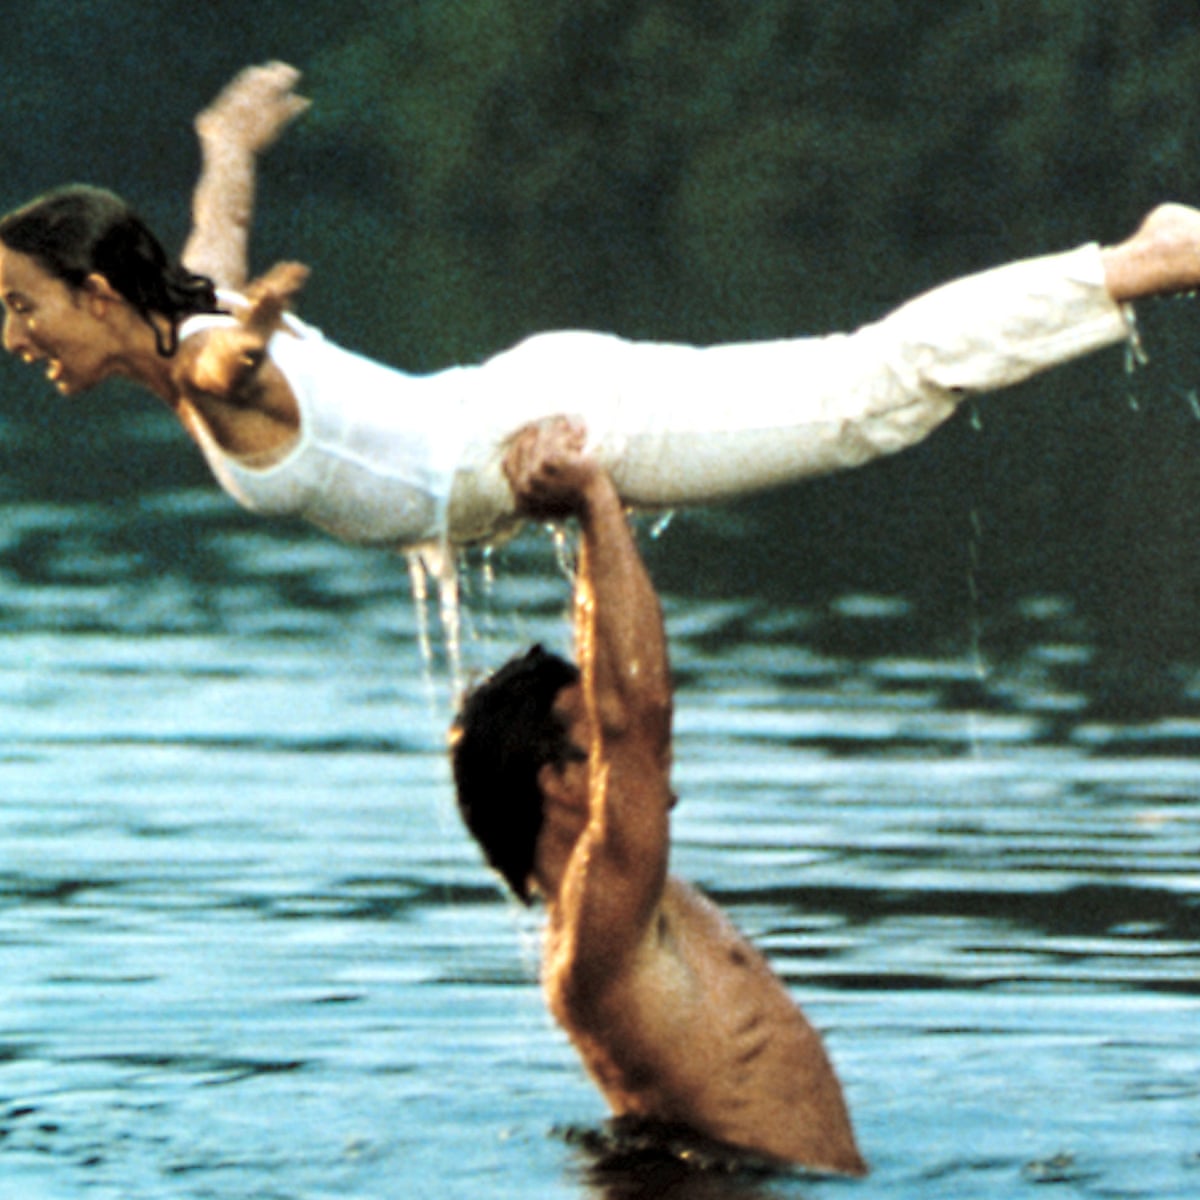 59 Top Images Dirty Dancing Full Movie Online Free : Dirty Dancing Havana Nights Watch Online Free On Fmovies